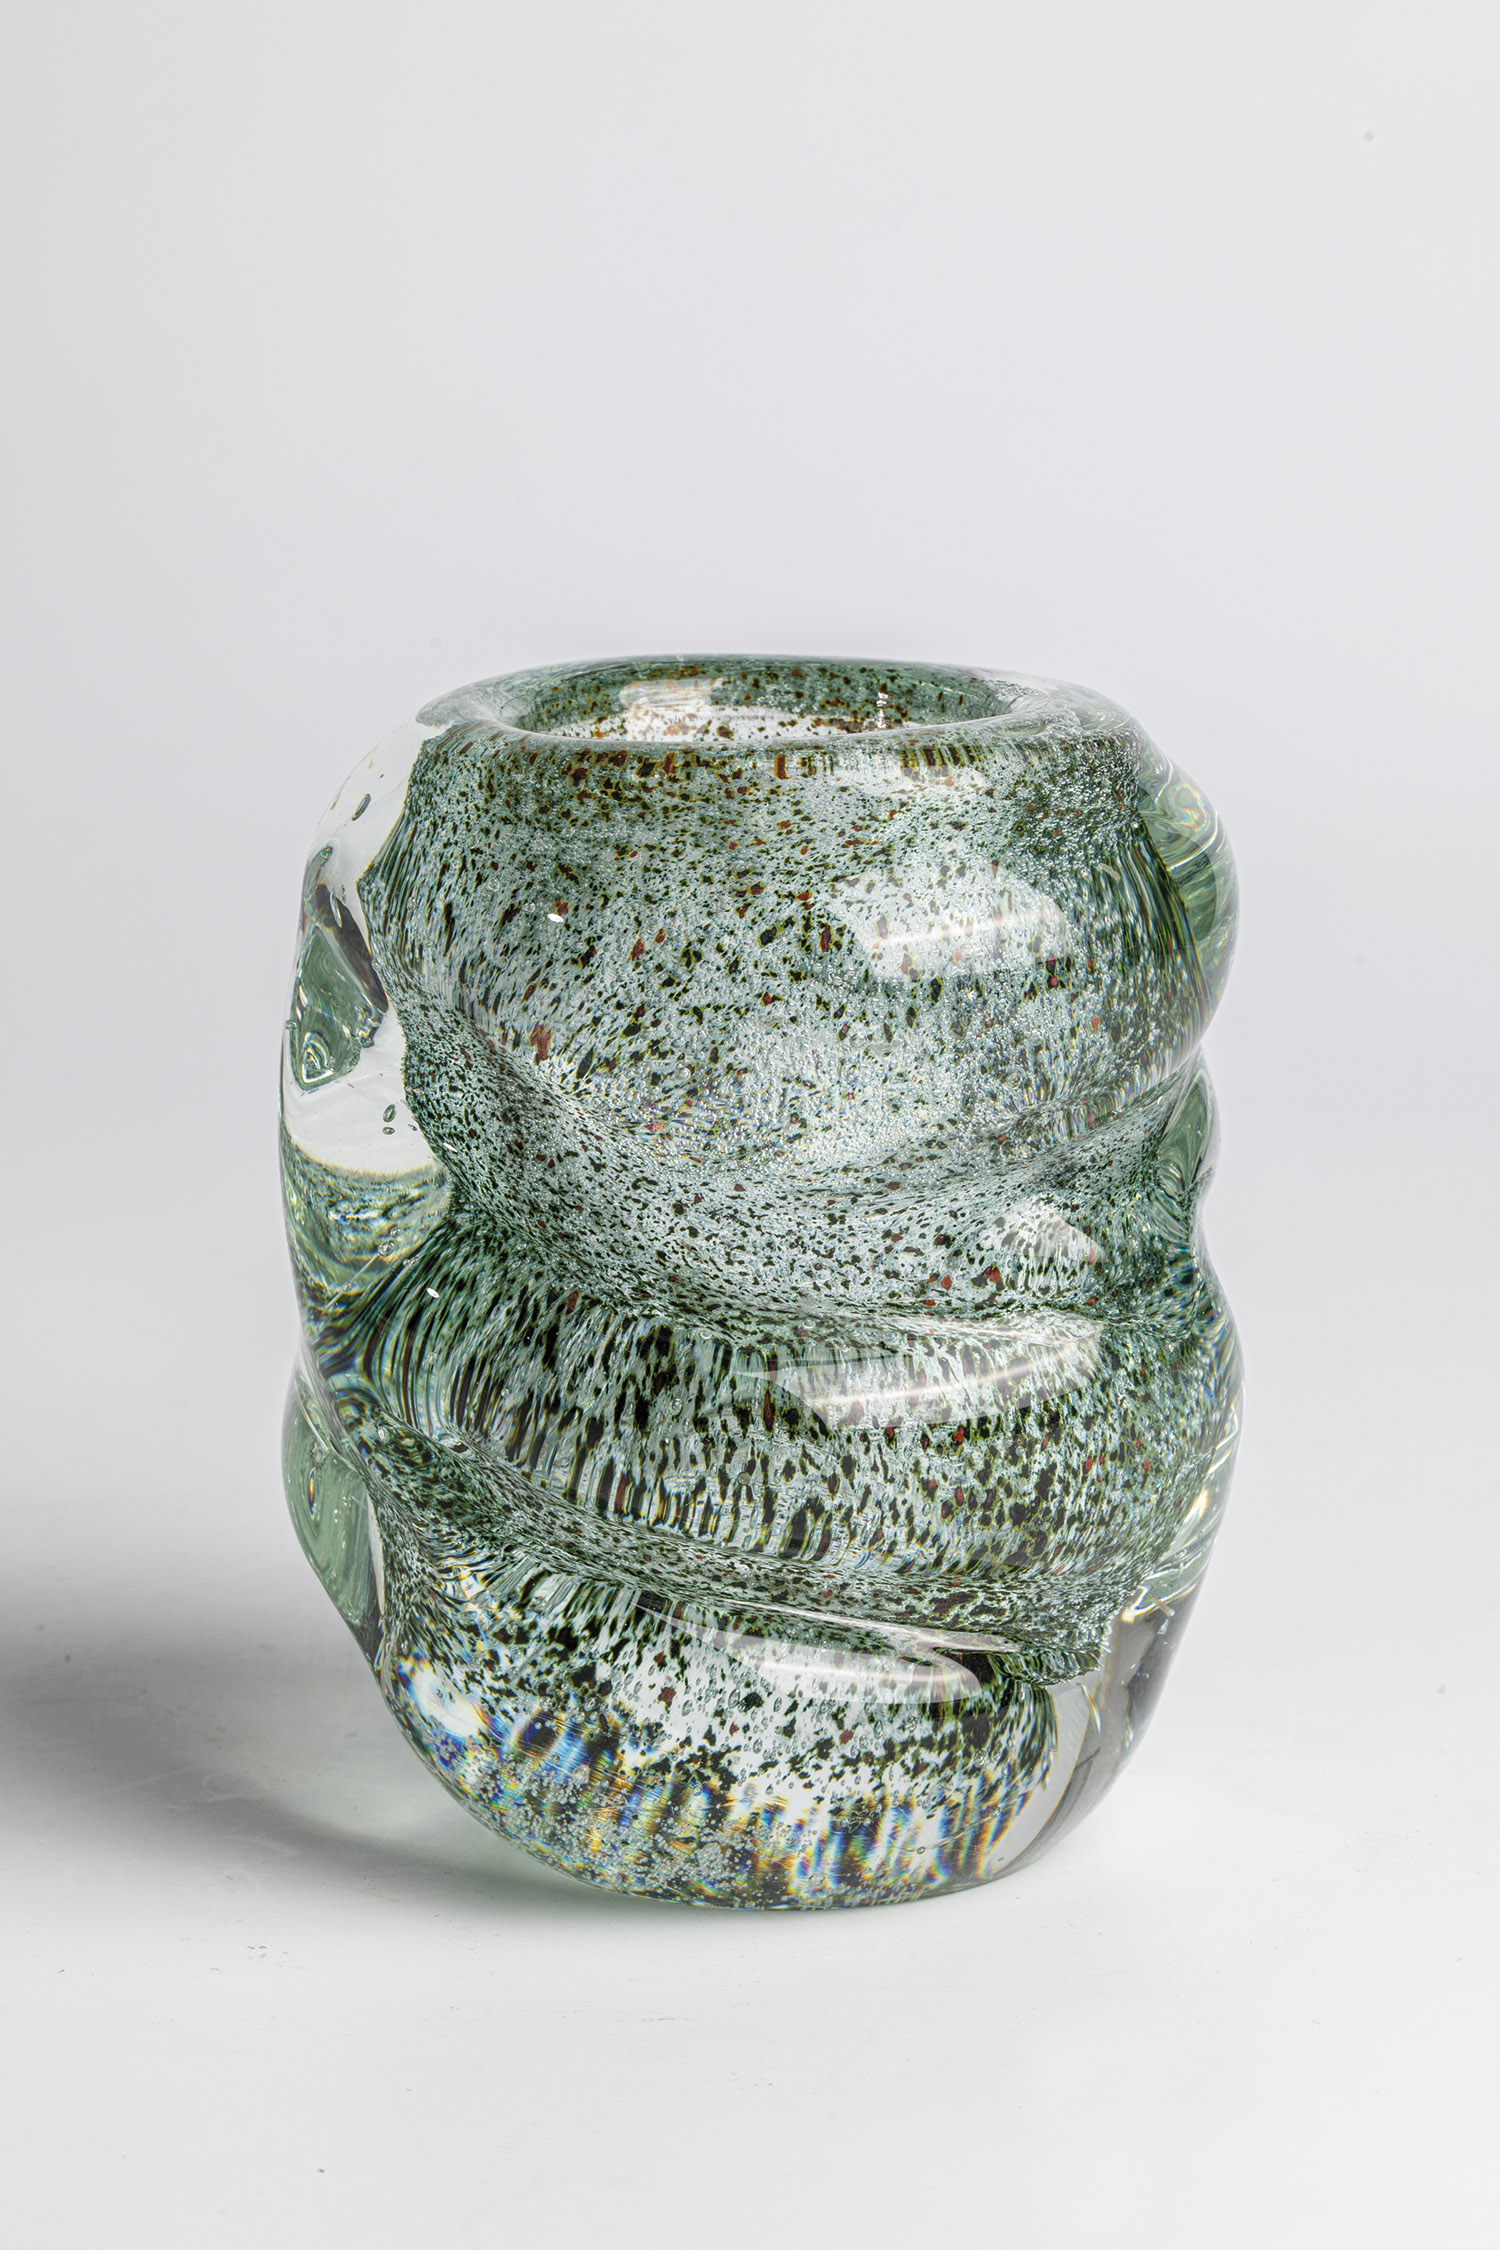 Small Vase Andre Thuret, 1950-60 Colourless, thick-walled glass, blown and shaped. With enclosed,